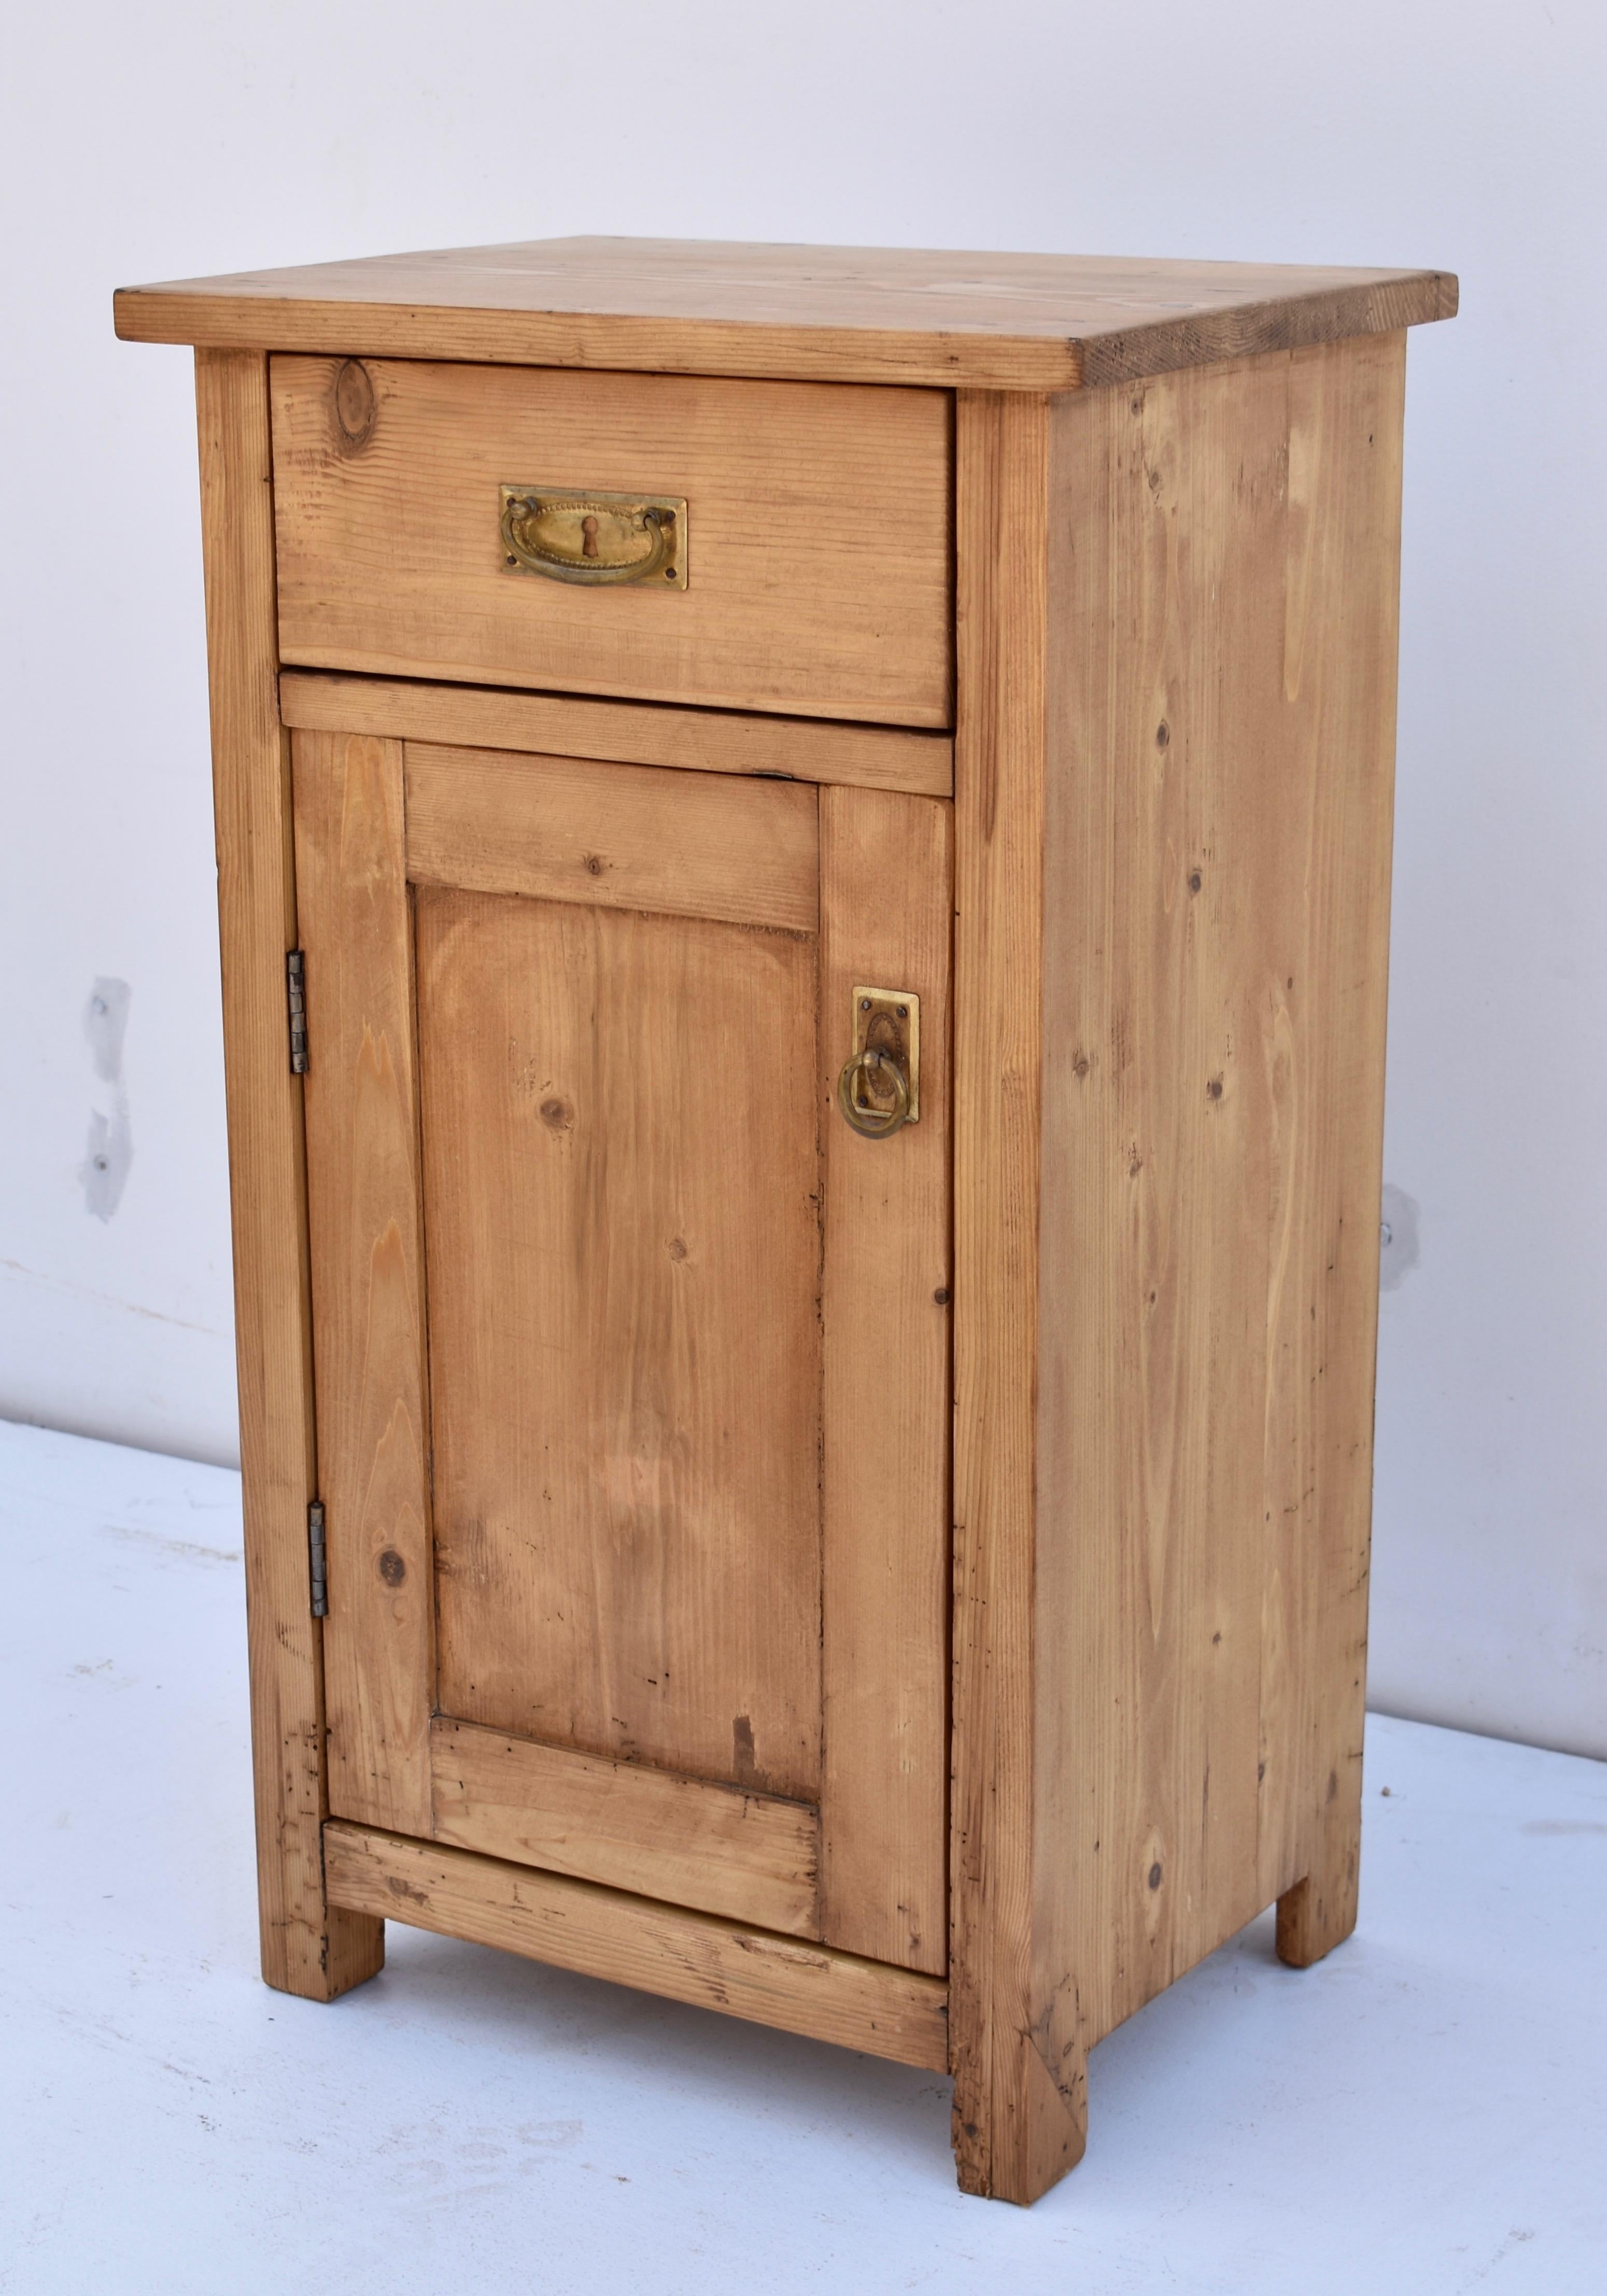 Country Pine Nightstand with One Door and One Drawer